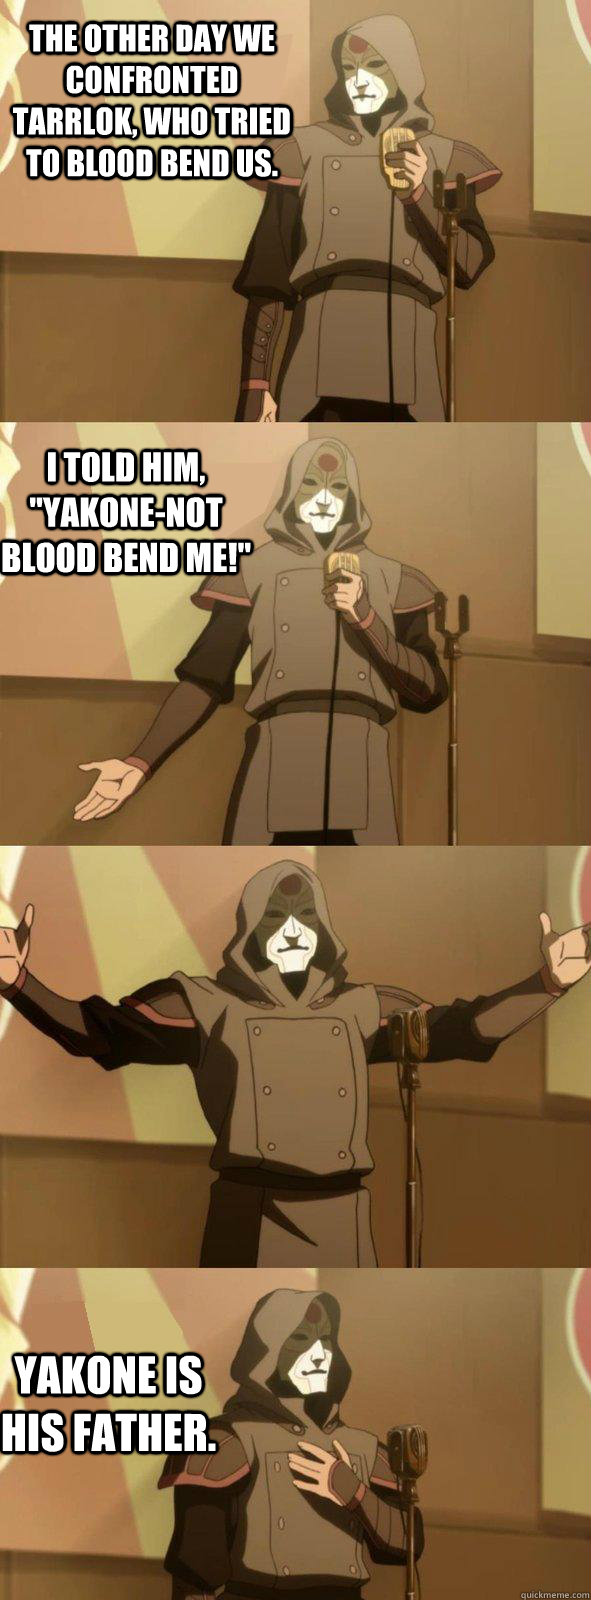 The other day we confronted Tarrlok, who tried to blood bend us. Yakone is his father. I told him, 